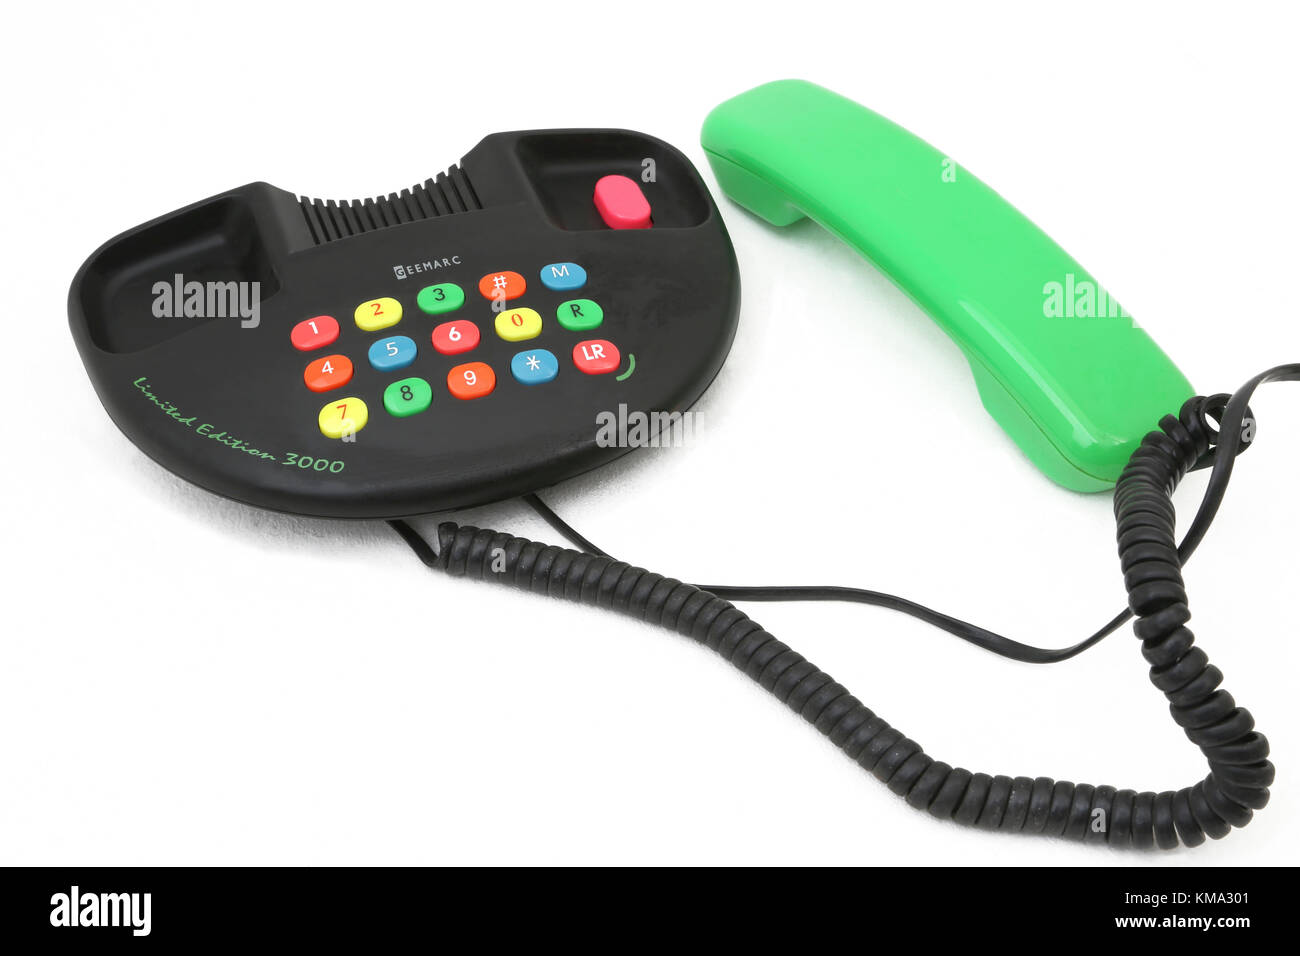 Colourful Telephone Geemarc Limited Edition 3000 Stock Photo